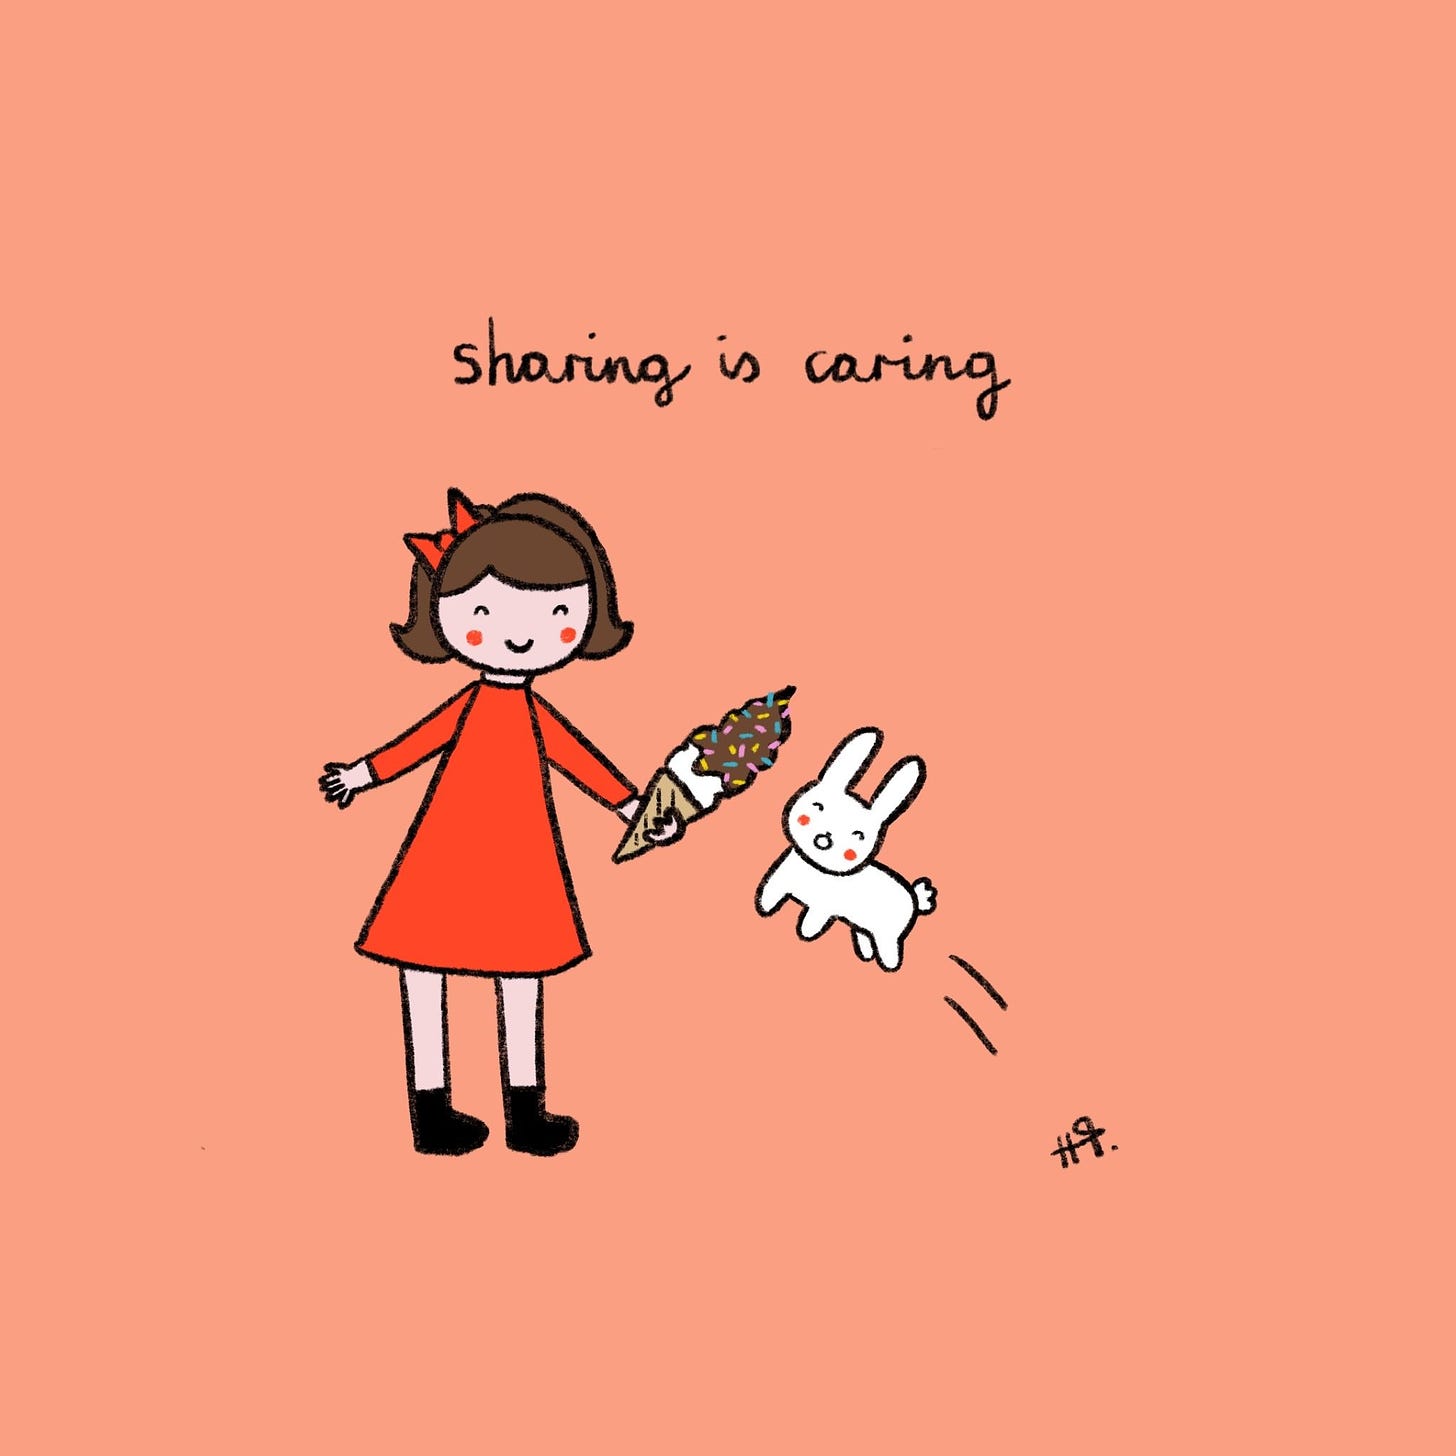 Sharing is caring | Drawing challenge, Girl drawing, Colorful drawings